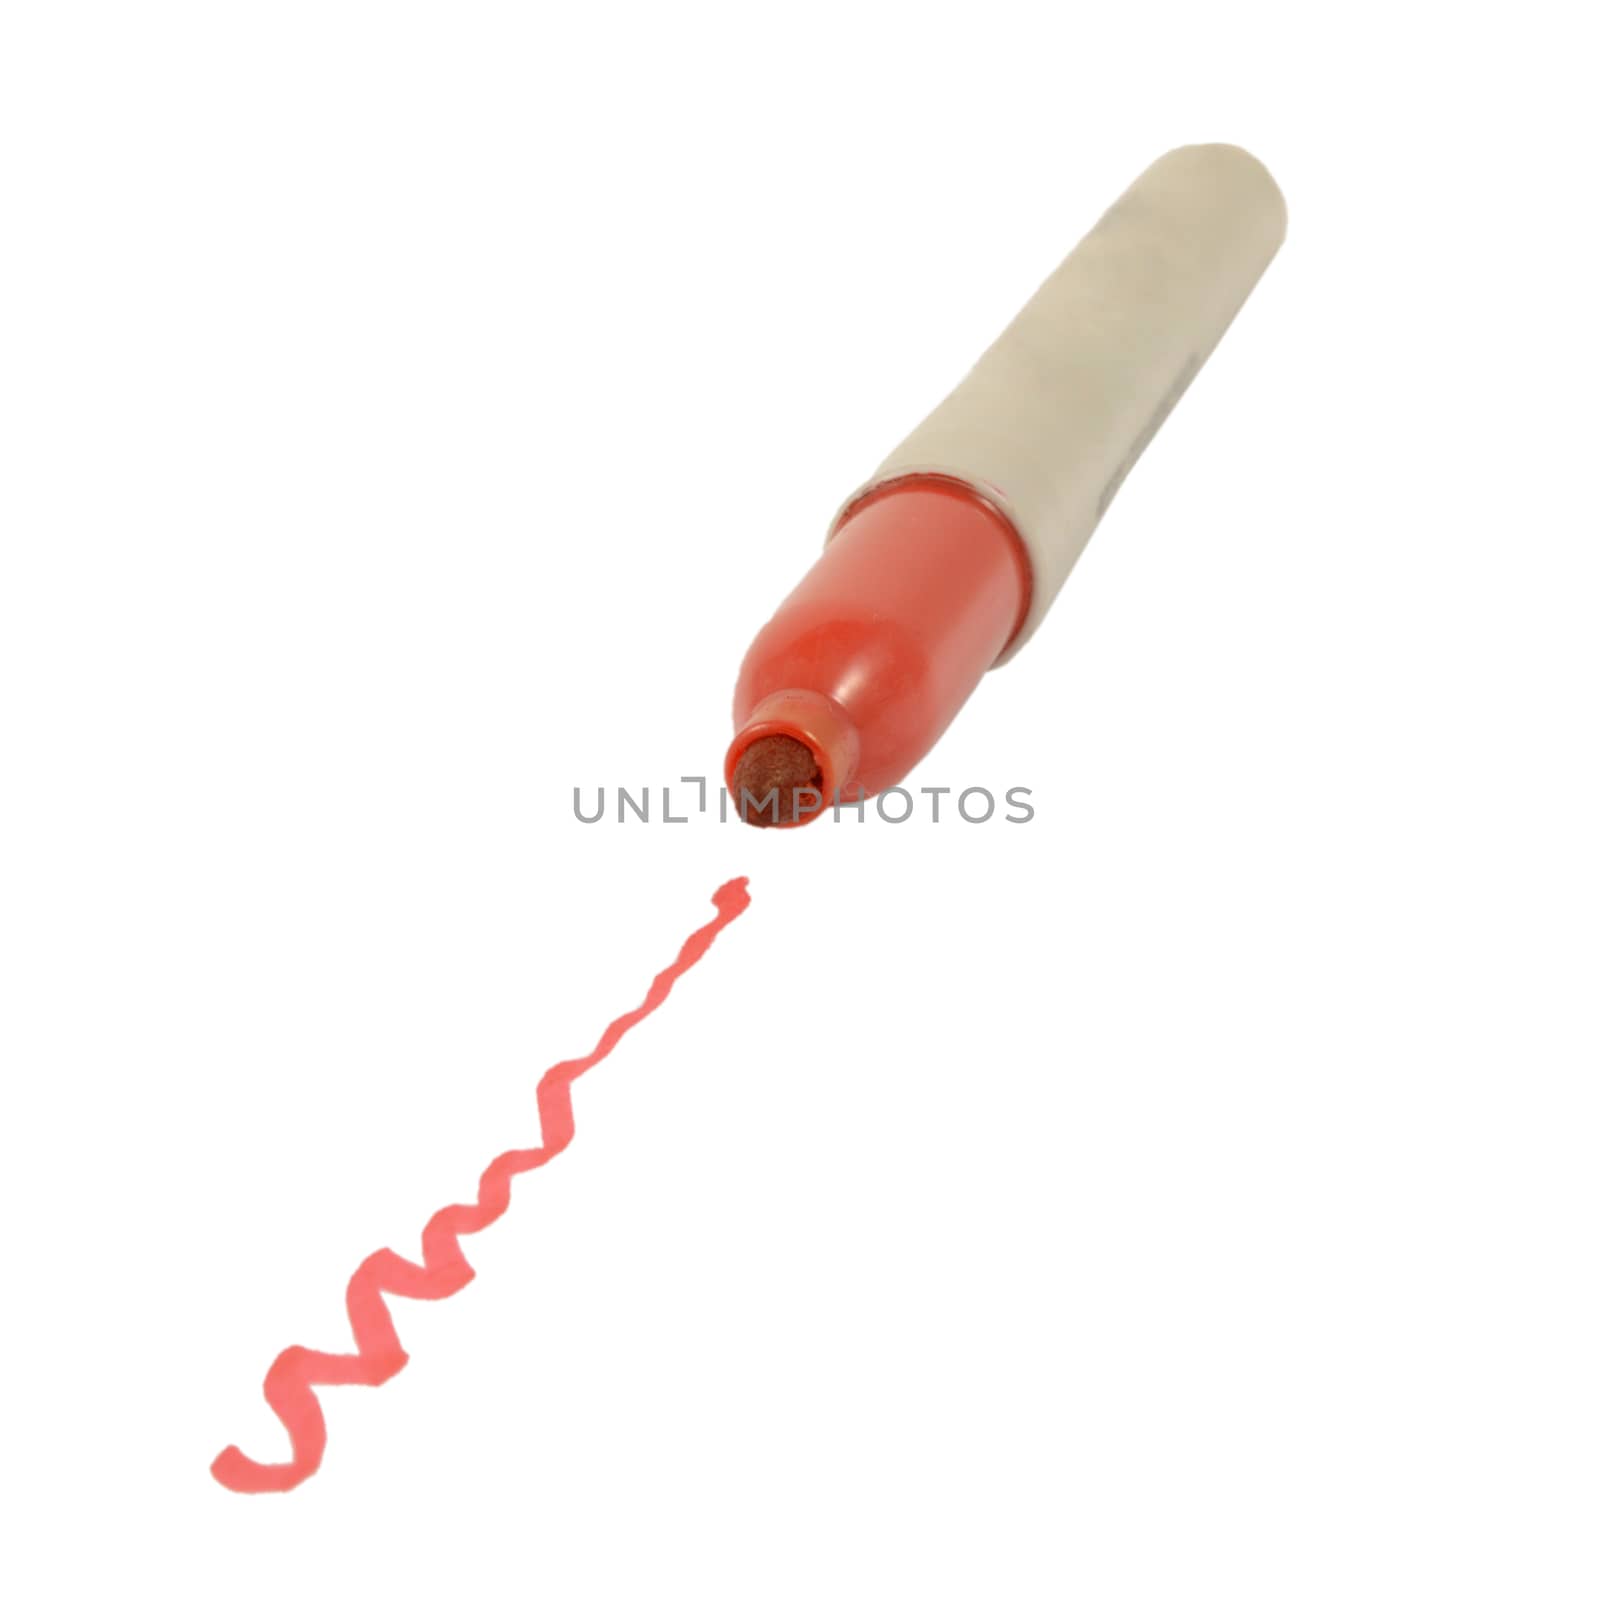 An isolated over white background image of a felt tip red permanent marker with a sqiggly line leading to the point.